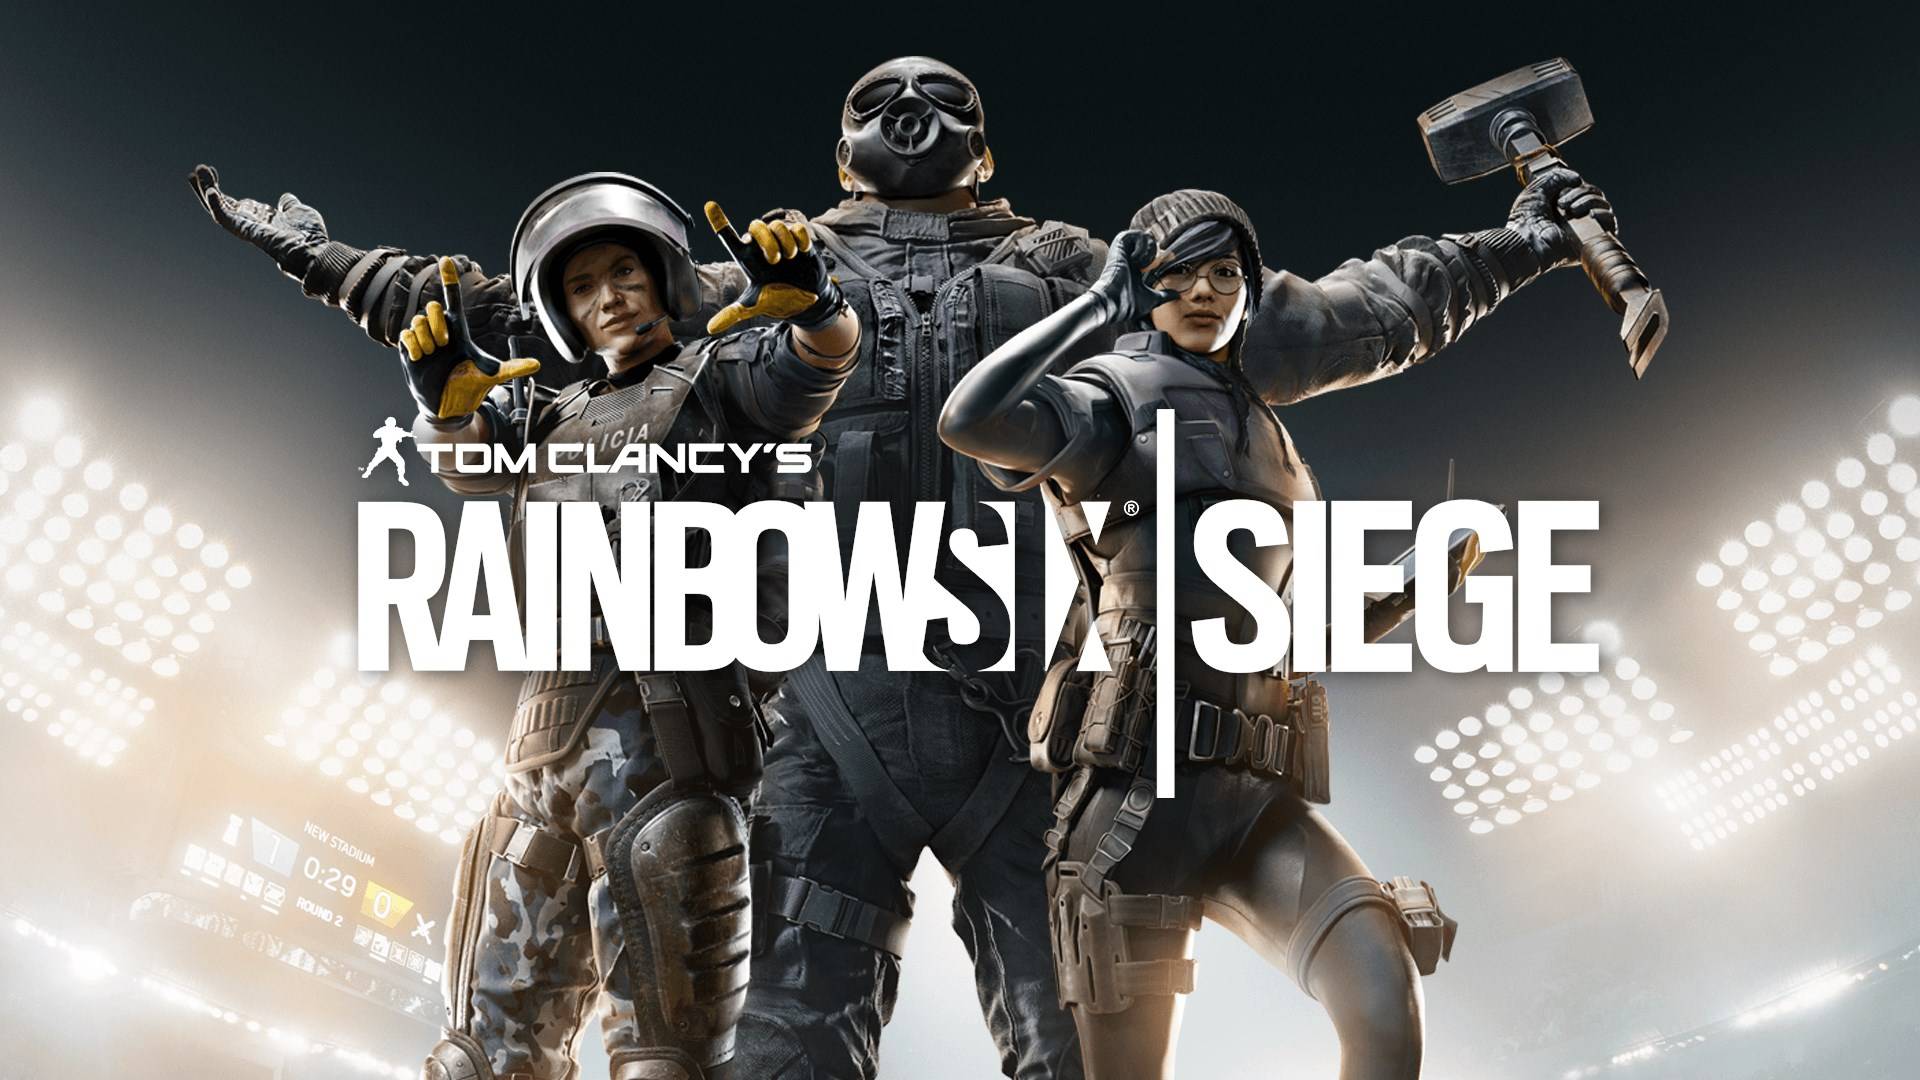 Rainbow 6 - R6SCL Stage 3 Getting Crazy - 4 teams tied for the 1st place in Brazil